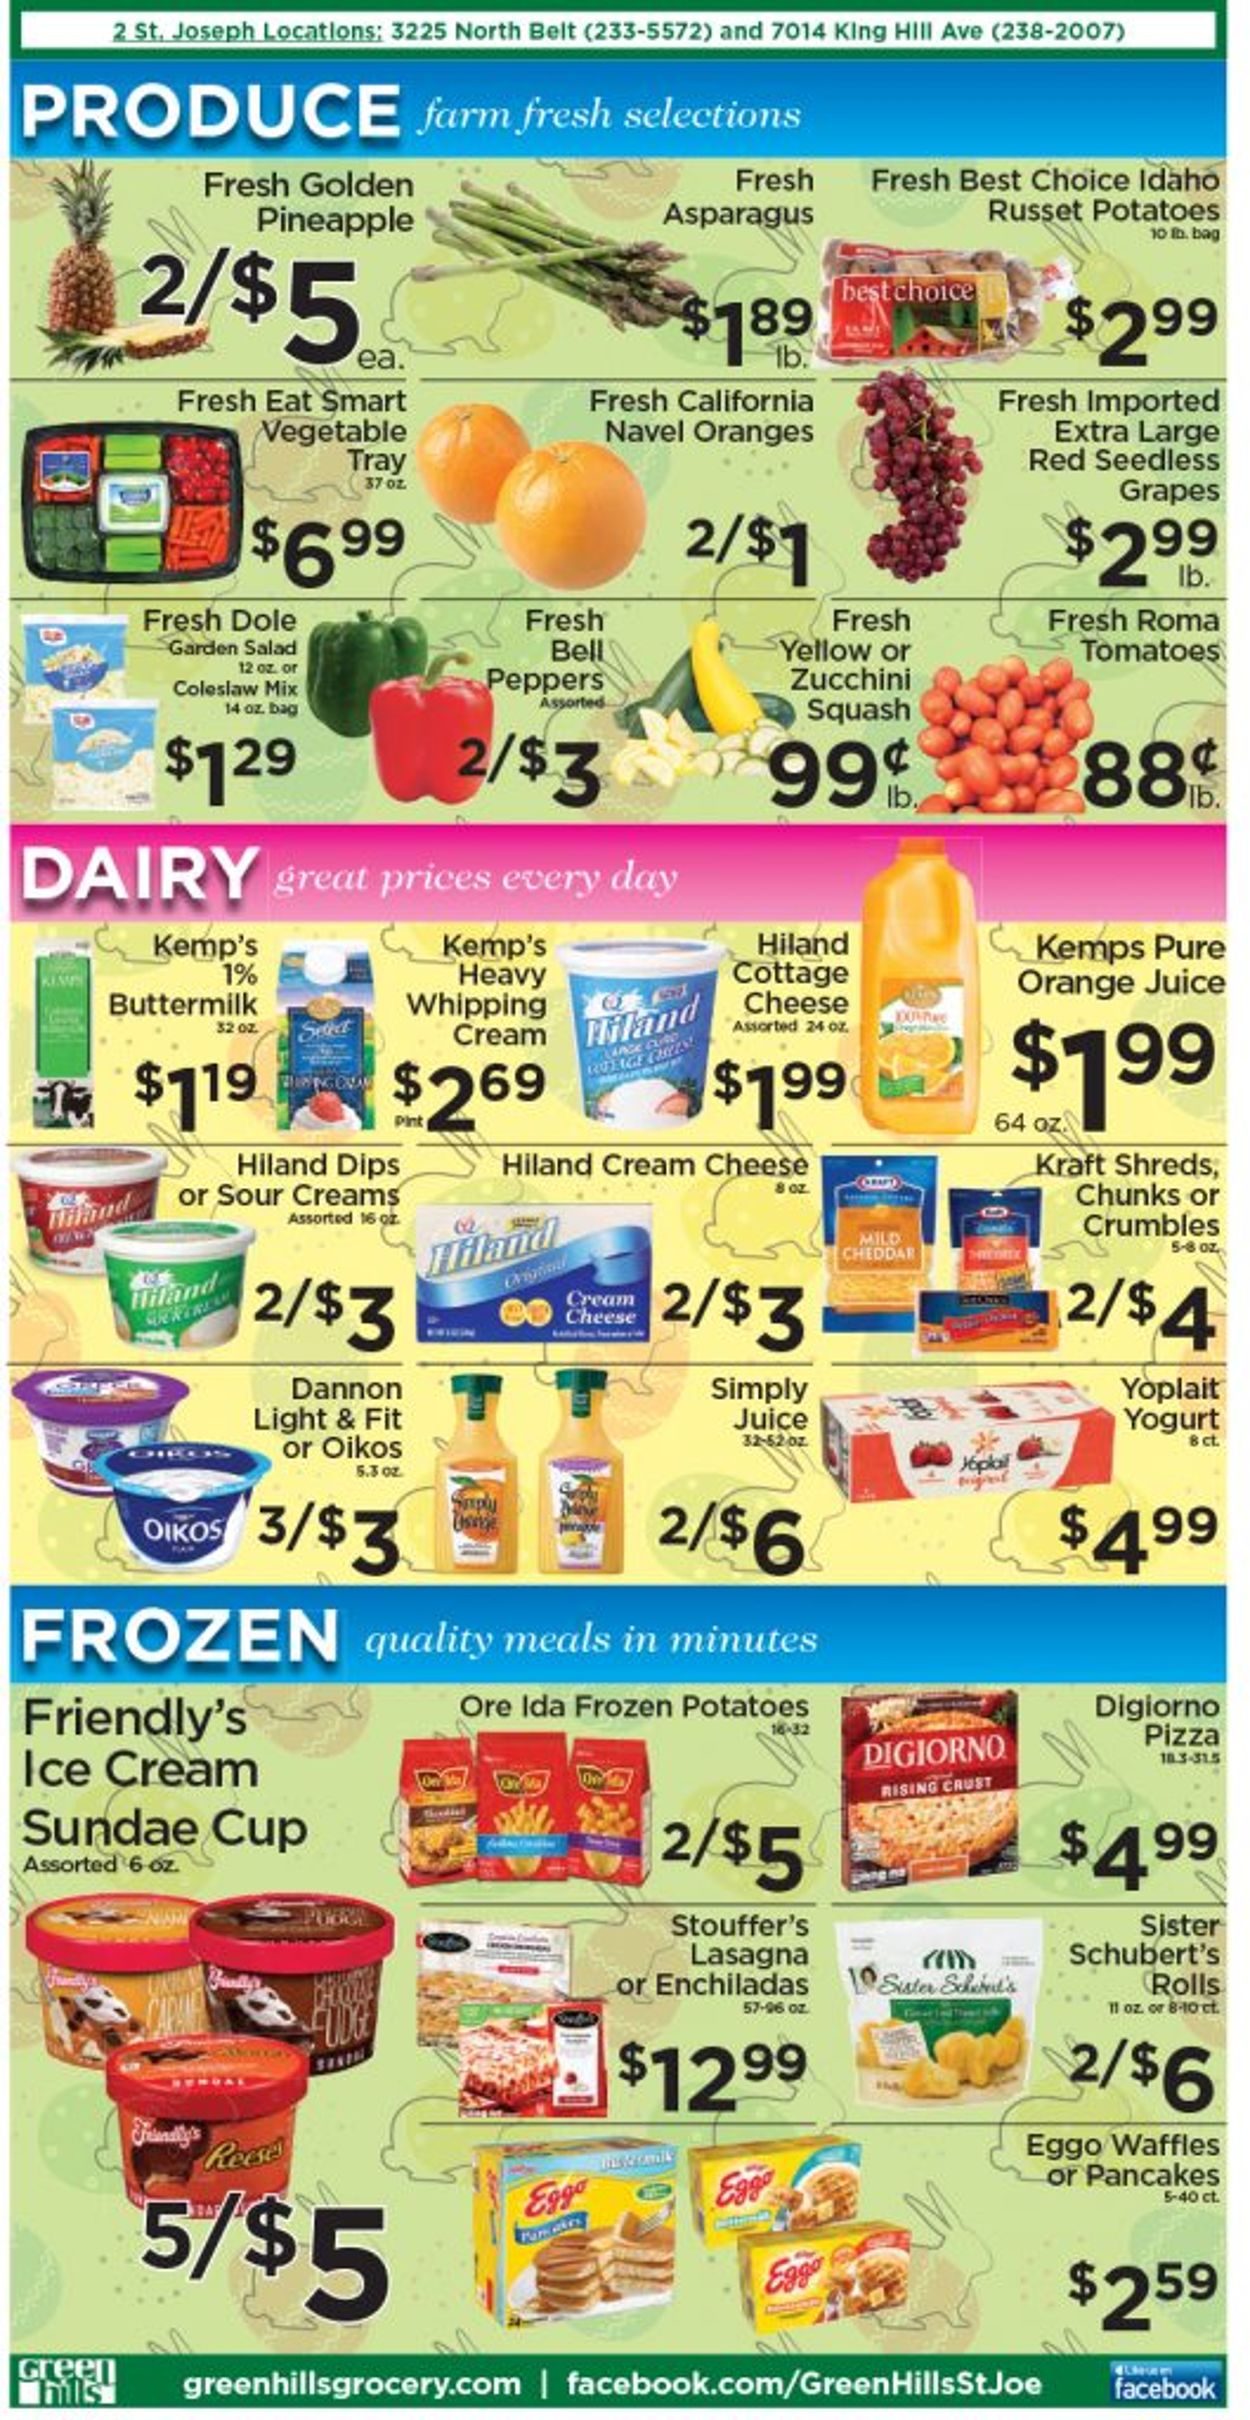 Green Hills Grocery - Easter 2021 Weekly Ad Circular - valid 03/31-04/06/2021 (Page 2)